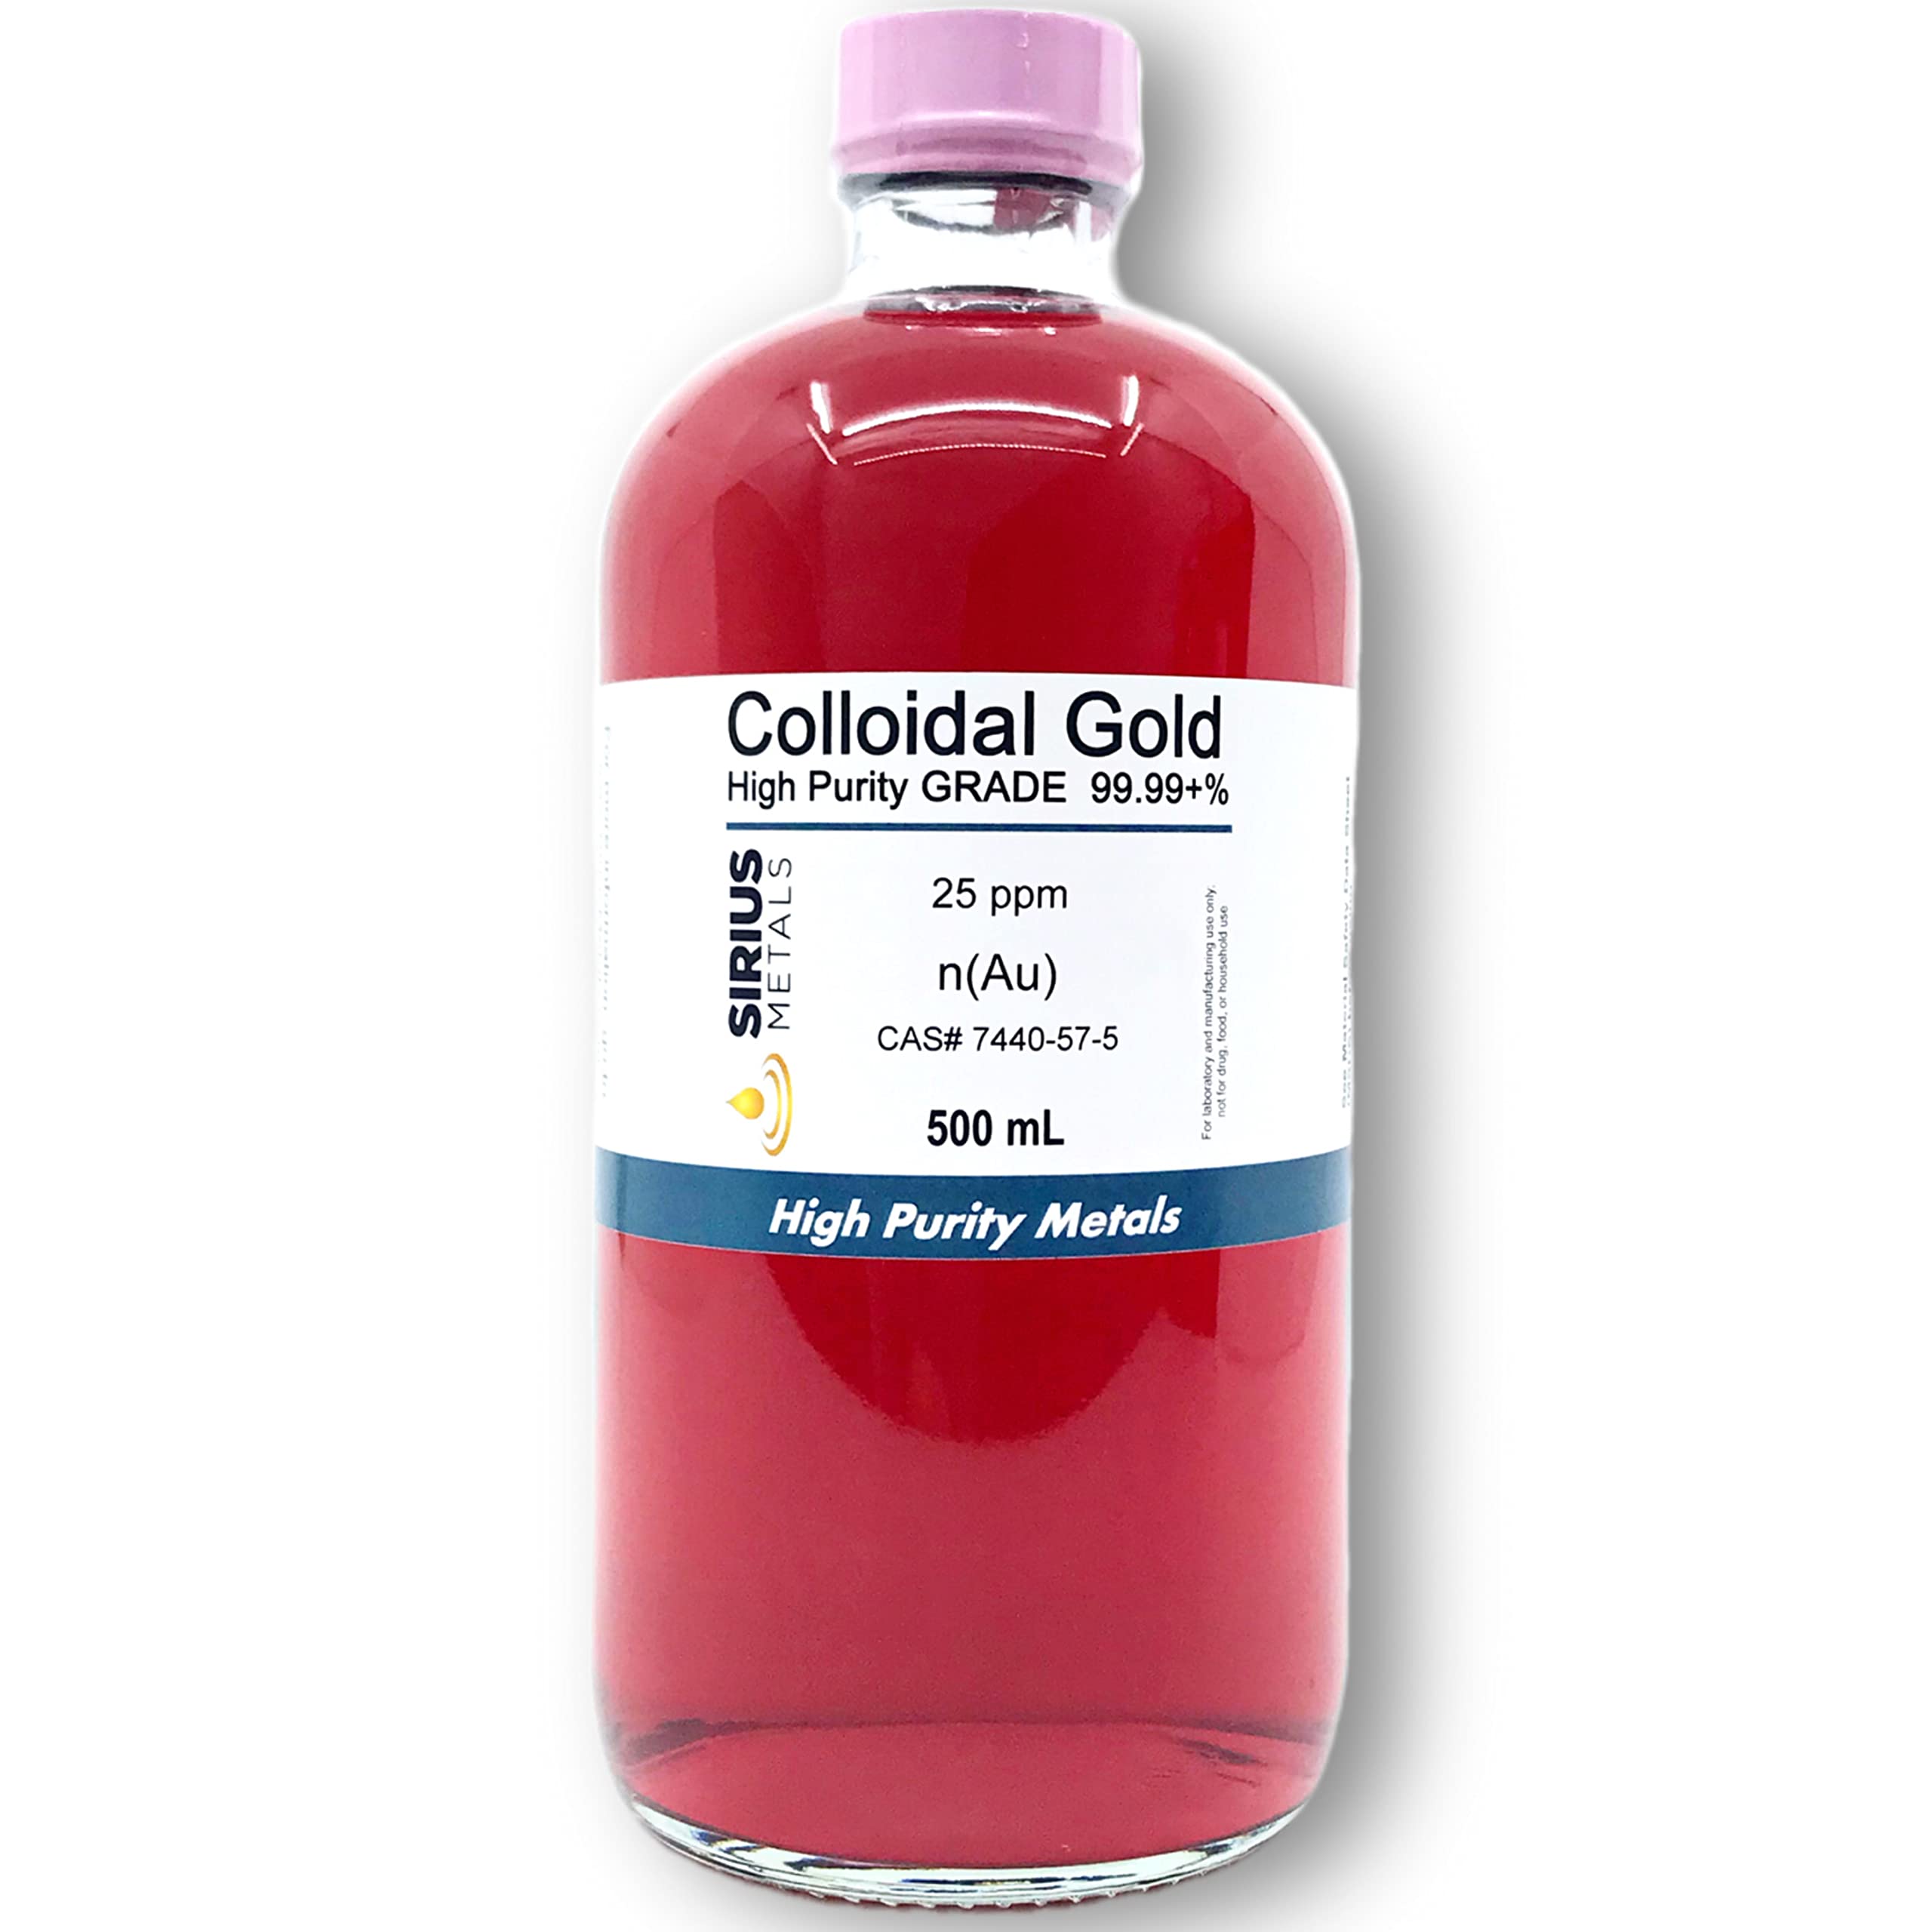 True Colloidal Gold – 25 ppm - 99.99+% Purity - 500 mL (16.9 Fl Oz) in Glass Bottle - Made in USA